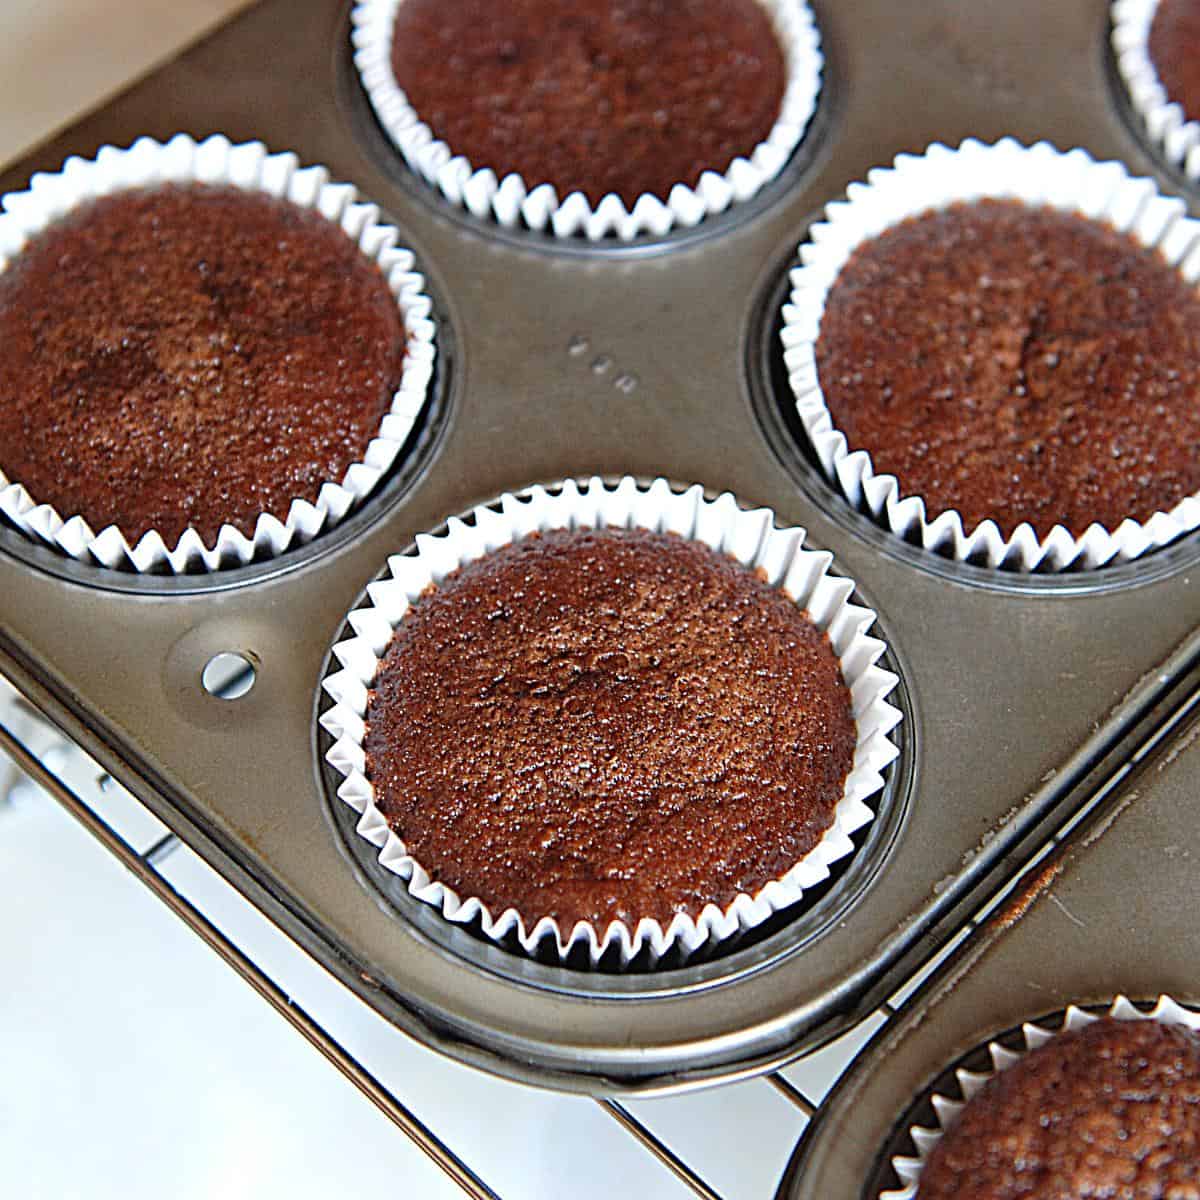 A muffin pan with chocolate cupcakes.